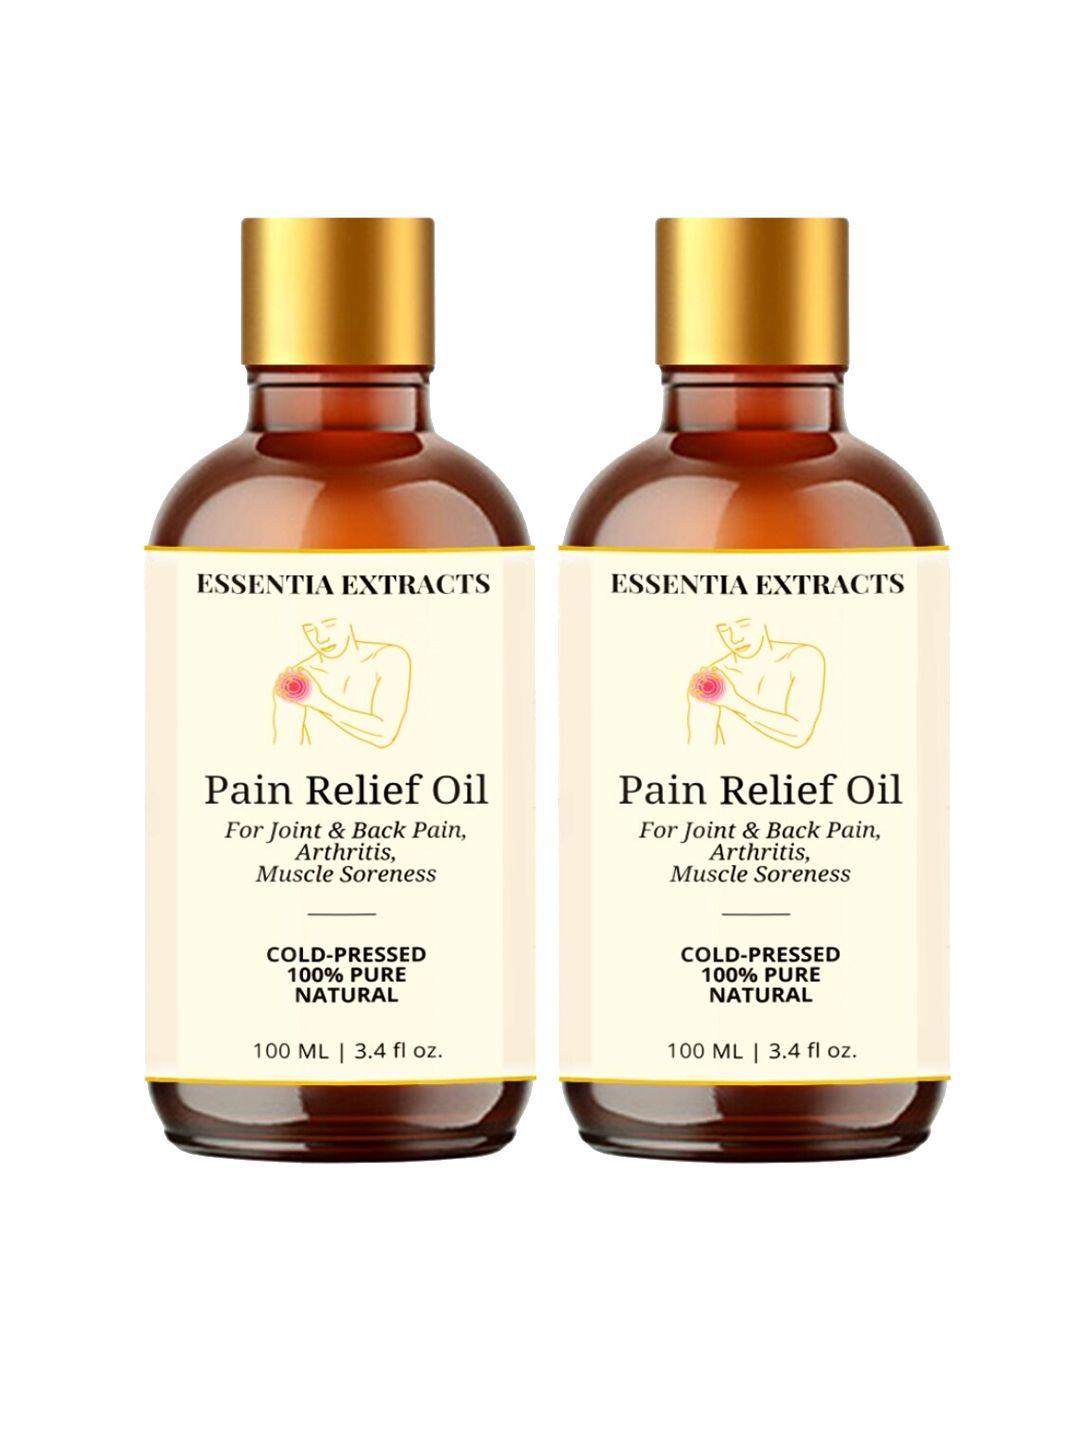 essentia extracts pack of 2 ayurvedic pain relief oil for muscle & joint pain -100ml each